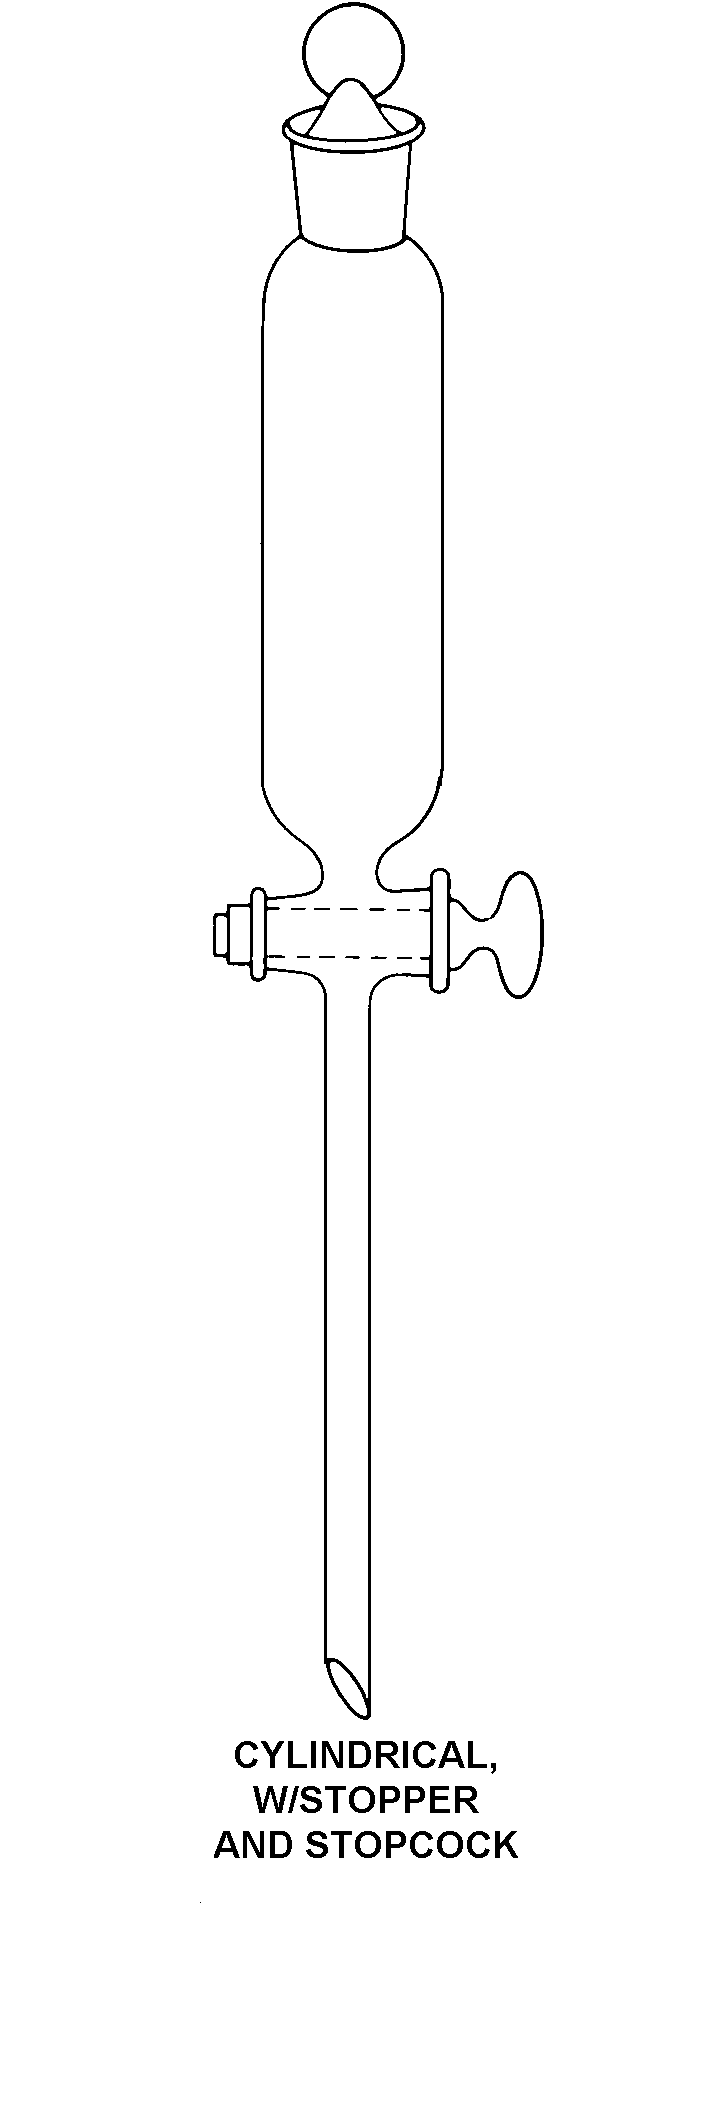 CYLINDRICAL , W/ STOPPER AND STOPCOCK style nsn 6640-00-290-6915